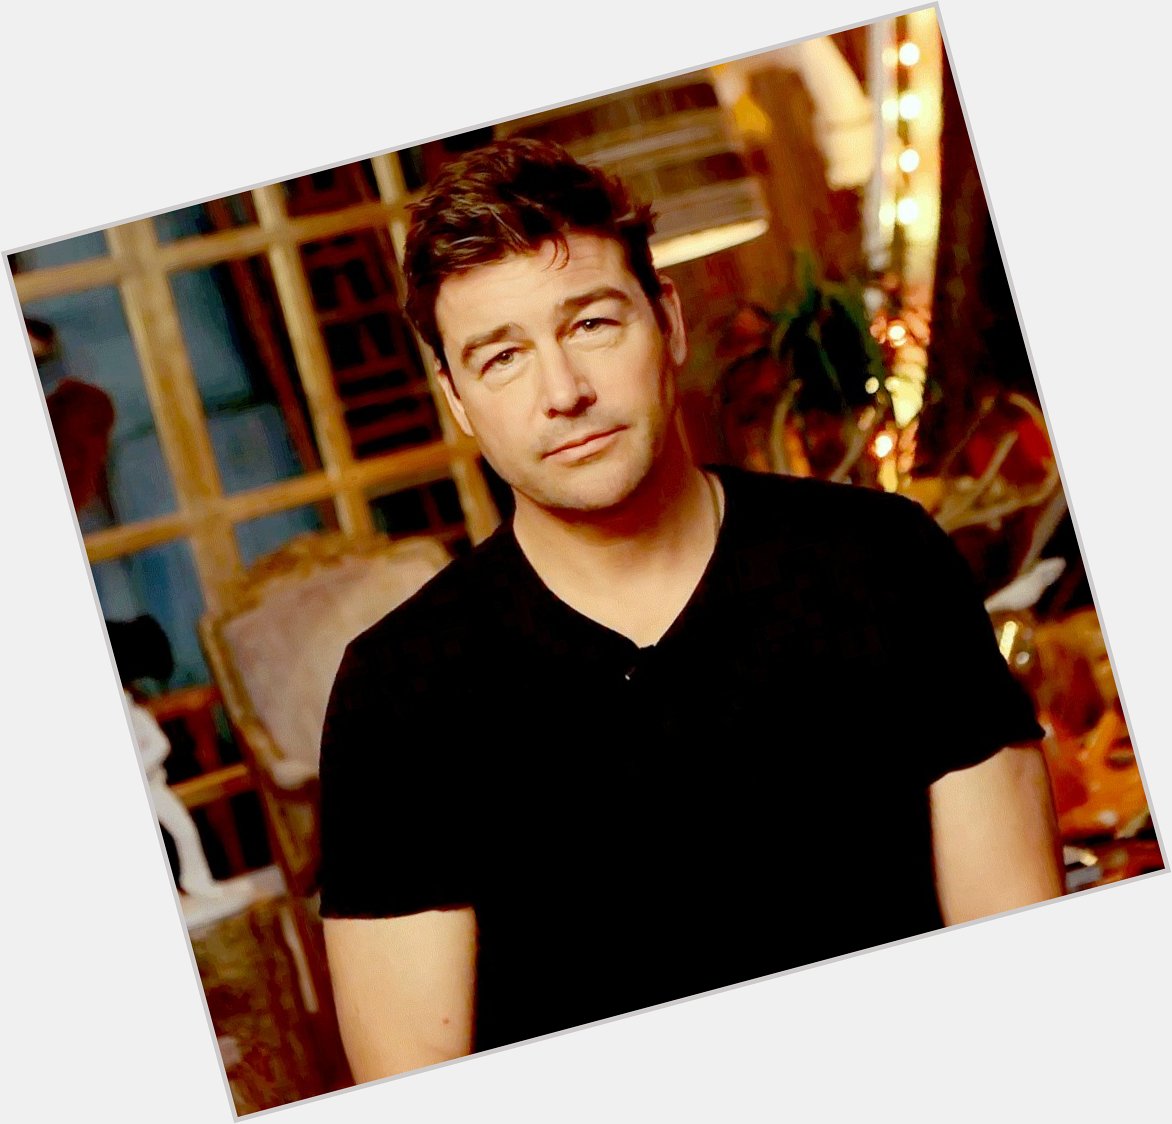 Happy birthday to the person in my avi sir kyle chandler <3 